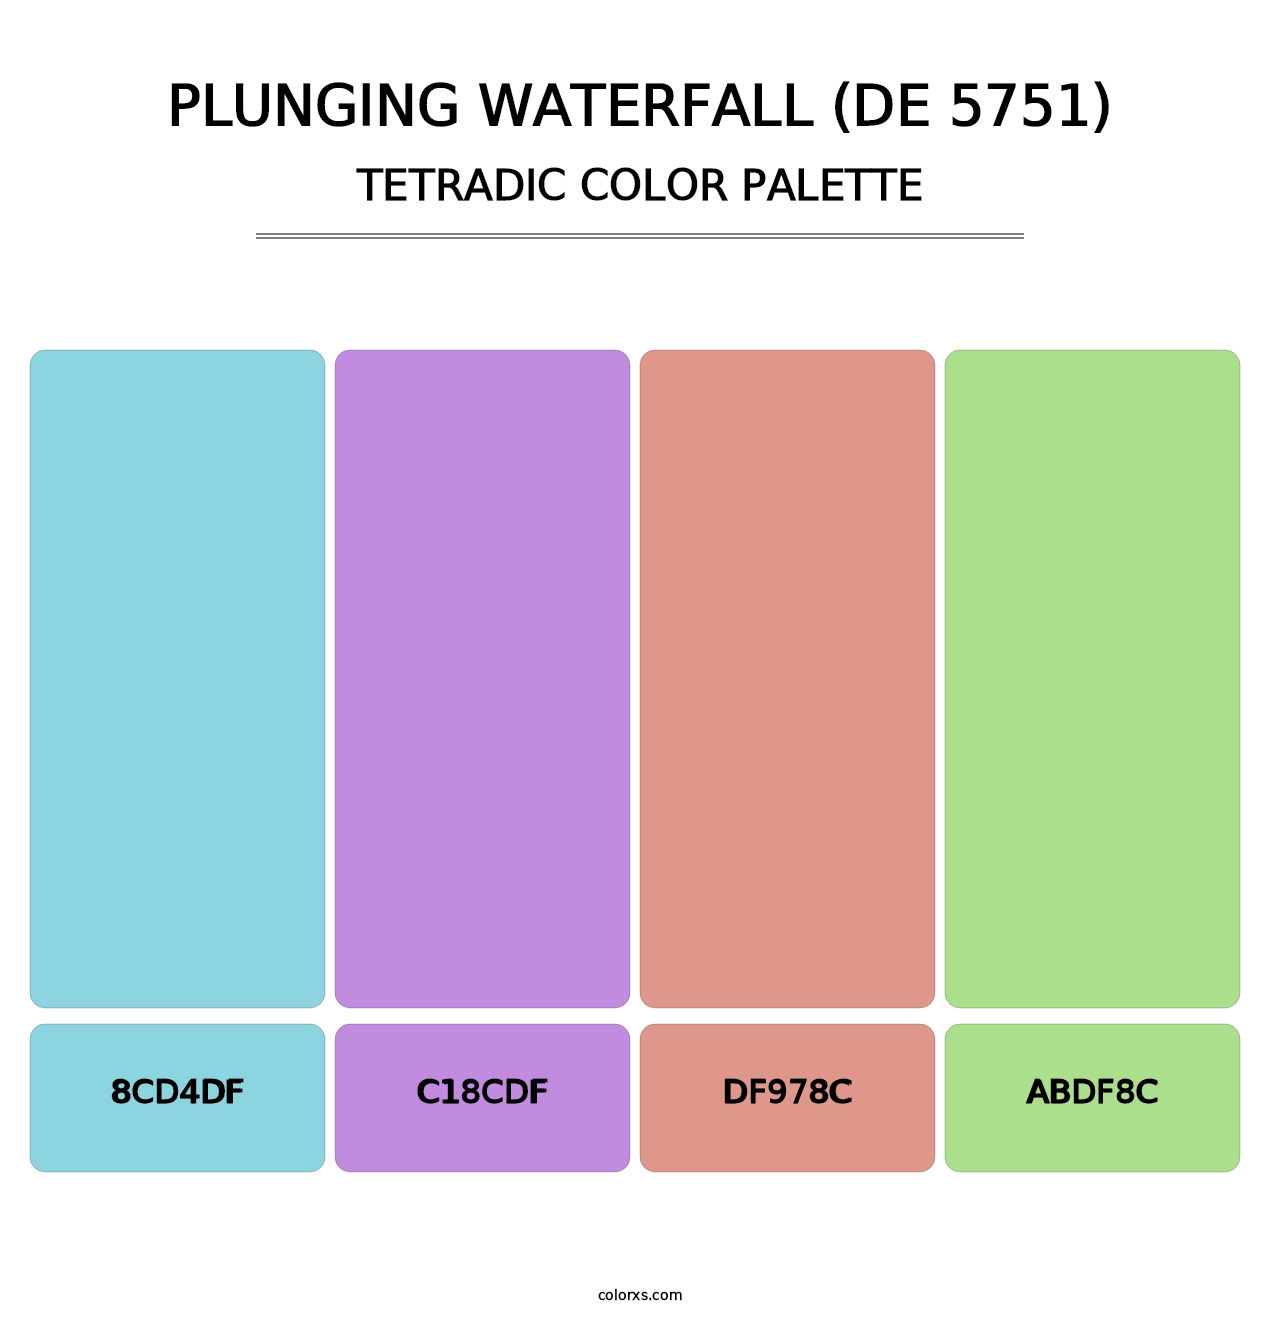 Plunging Waterfall (DE 5751) - Tetradic Color Palette